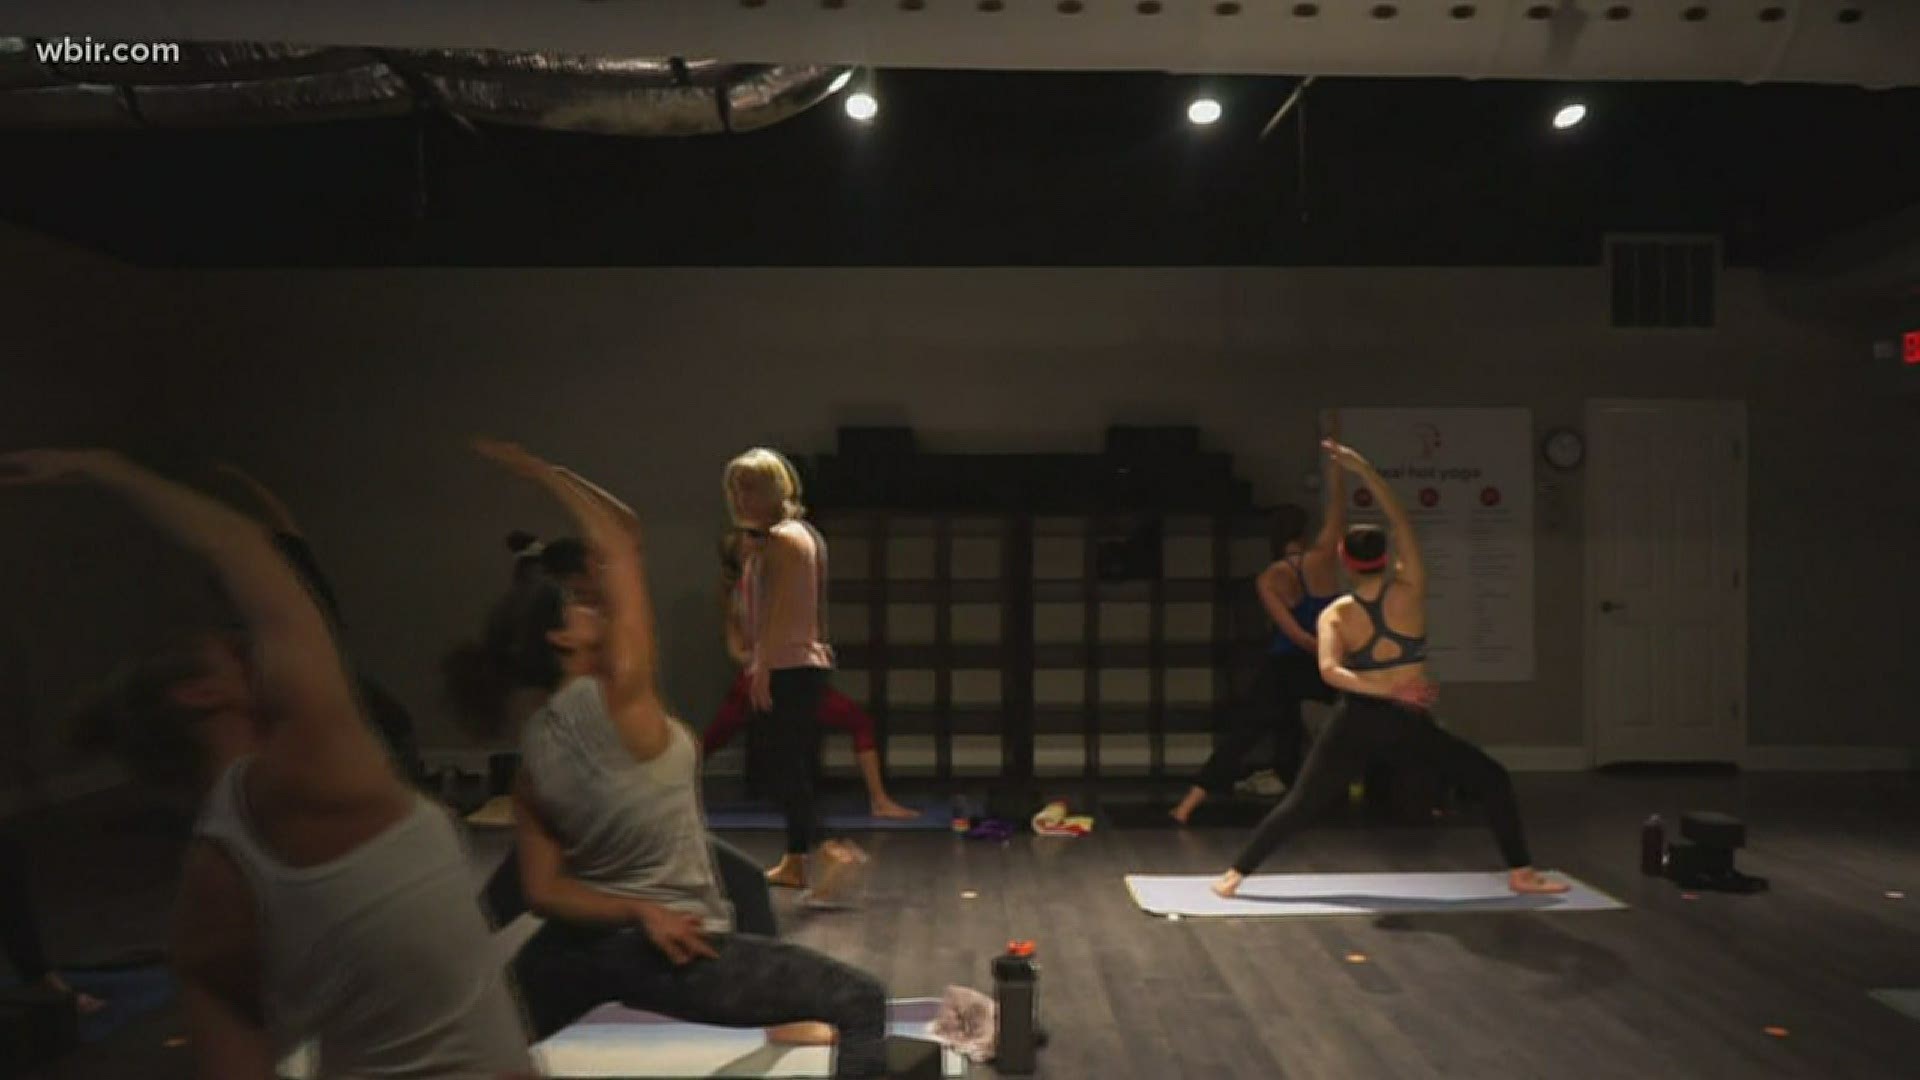 Small fitness centers like yoga, spin and barre studios say they are struggling with the phased reopening.